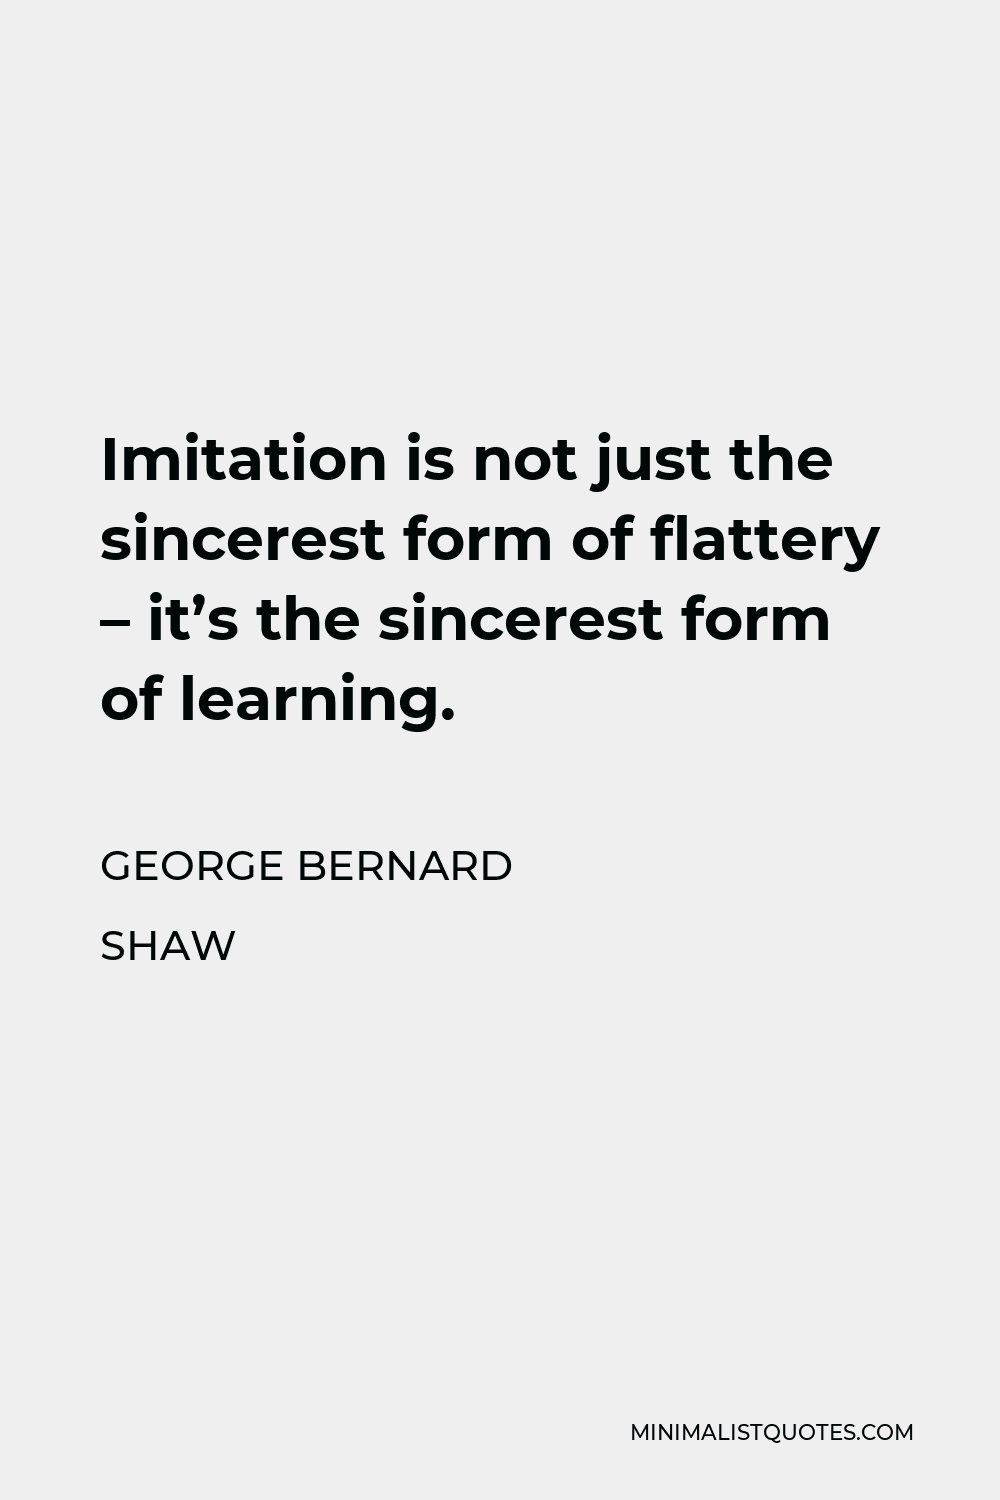 George Bernard Shaw Quote: Imitation is not just the sincerest form of  flattery - it's the sincerest form of learning.